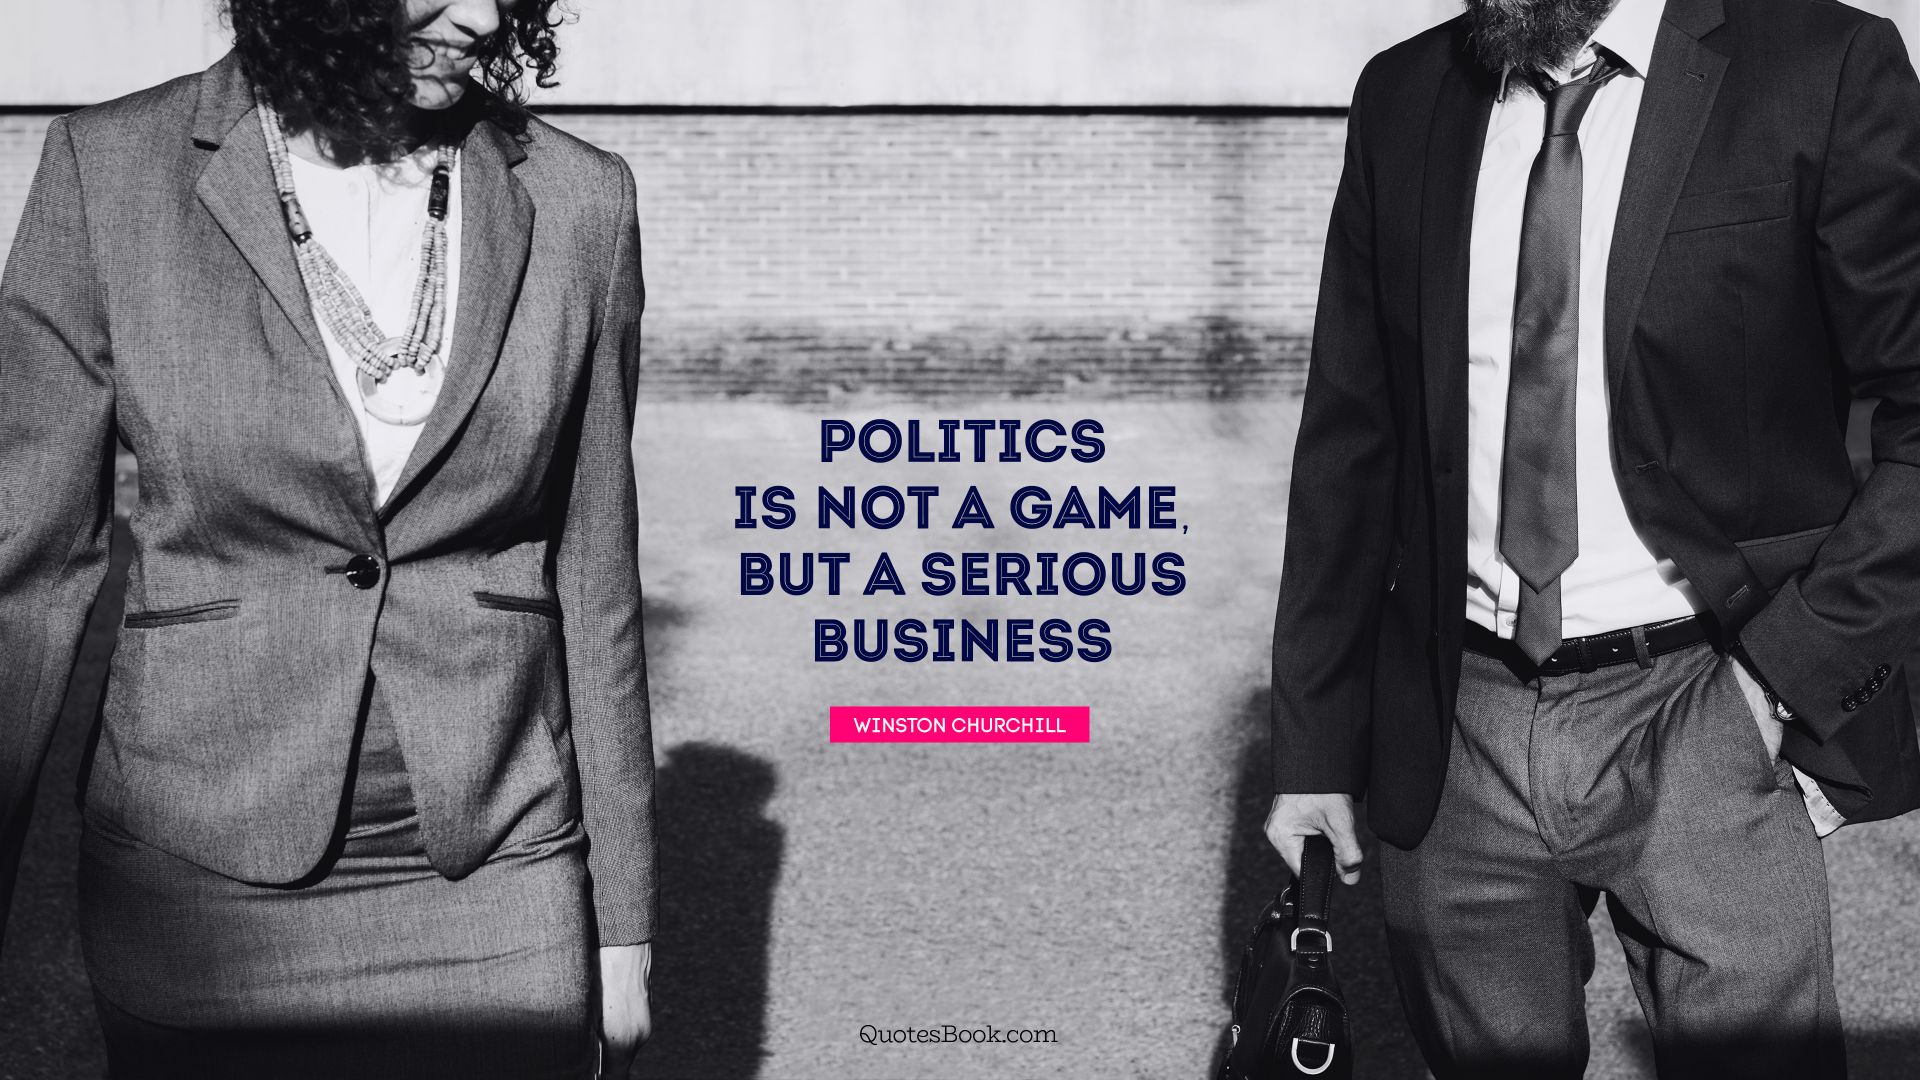 Politics is not a game, but a serious business. - Quote by Winston Churchill